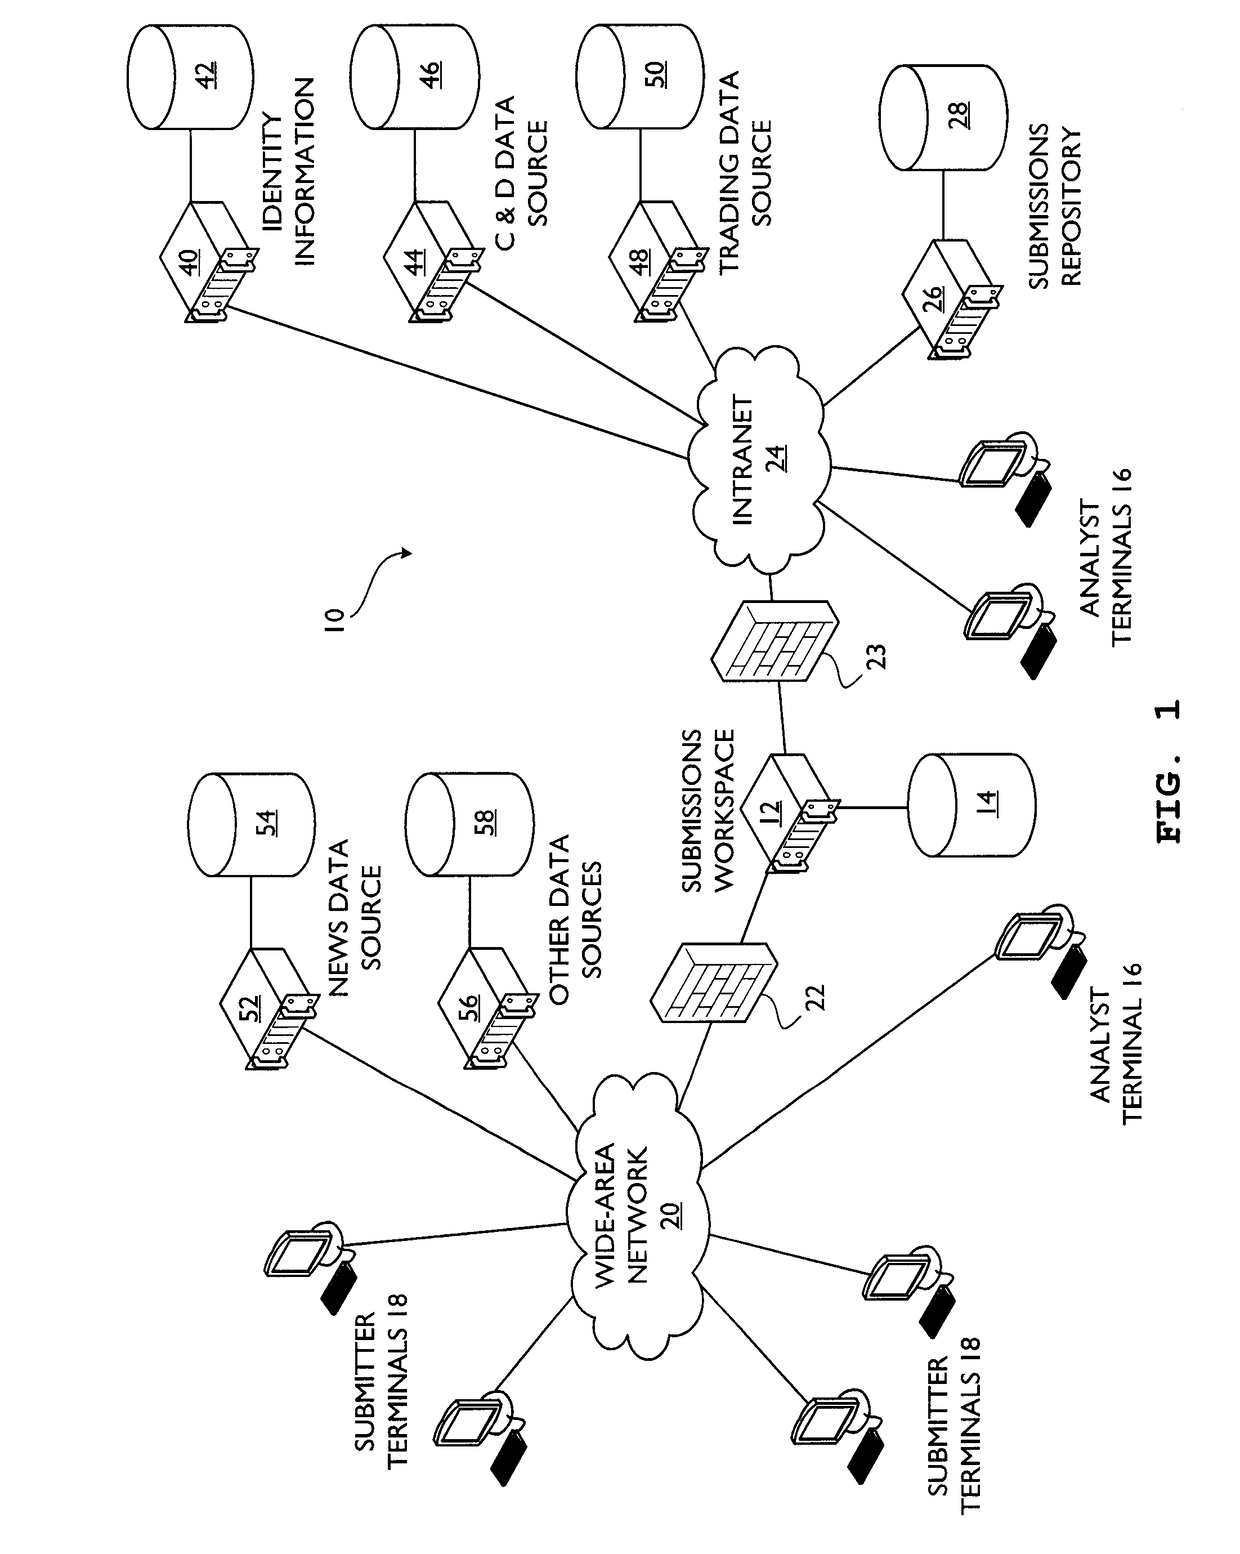 System and method for electronic data submission processing